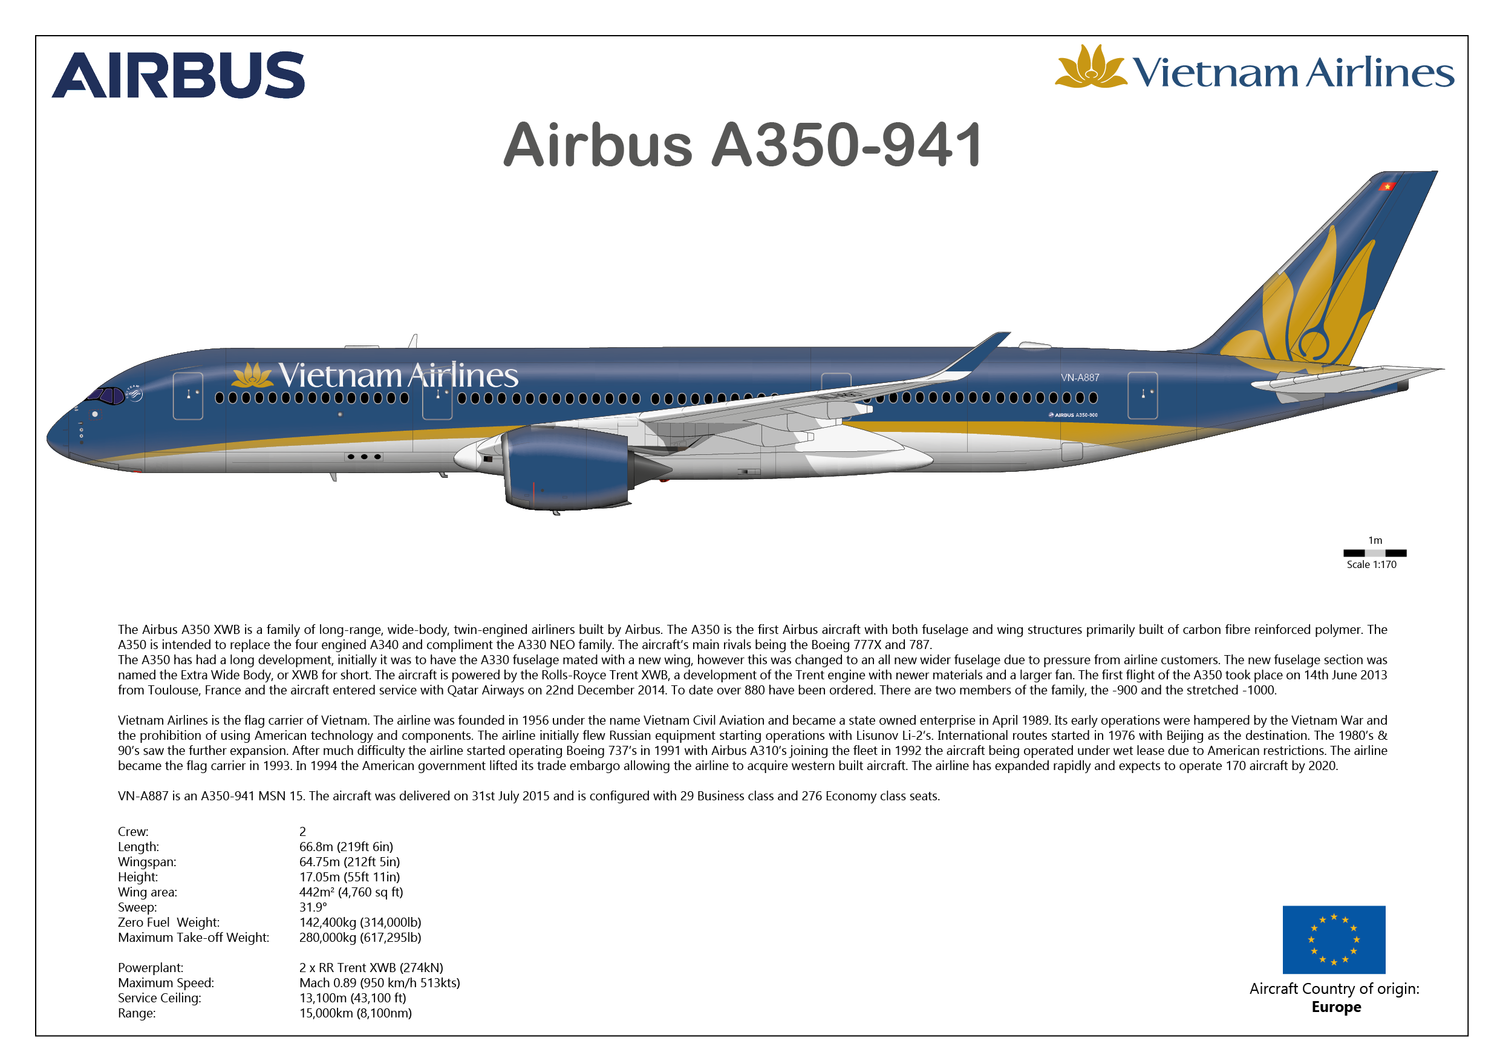 Airbus A350 VN-A887 in Vietnam Airlines livery- Digital Download